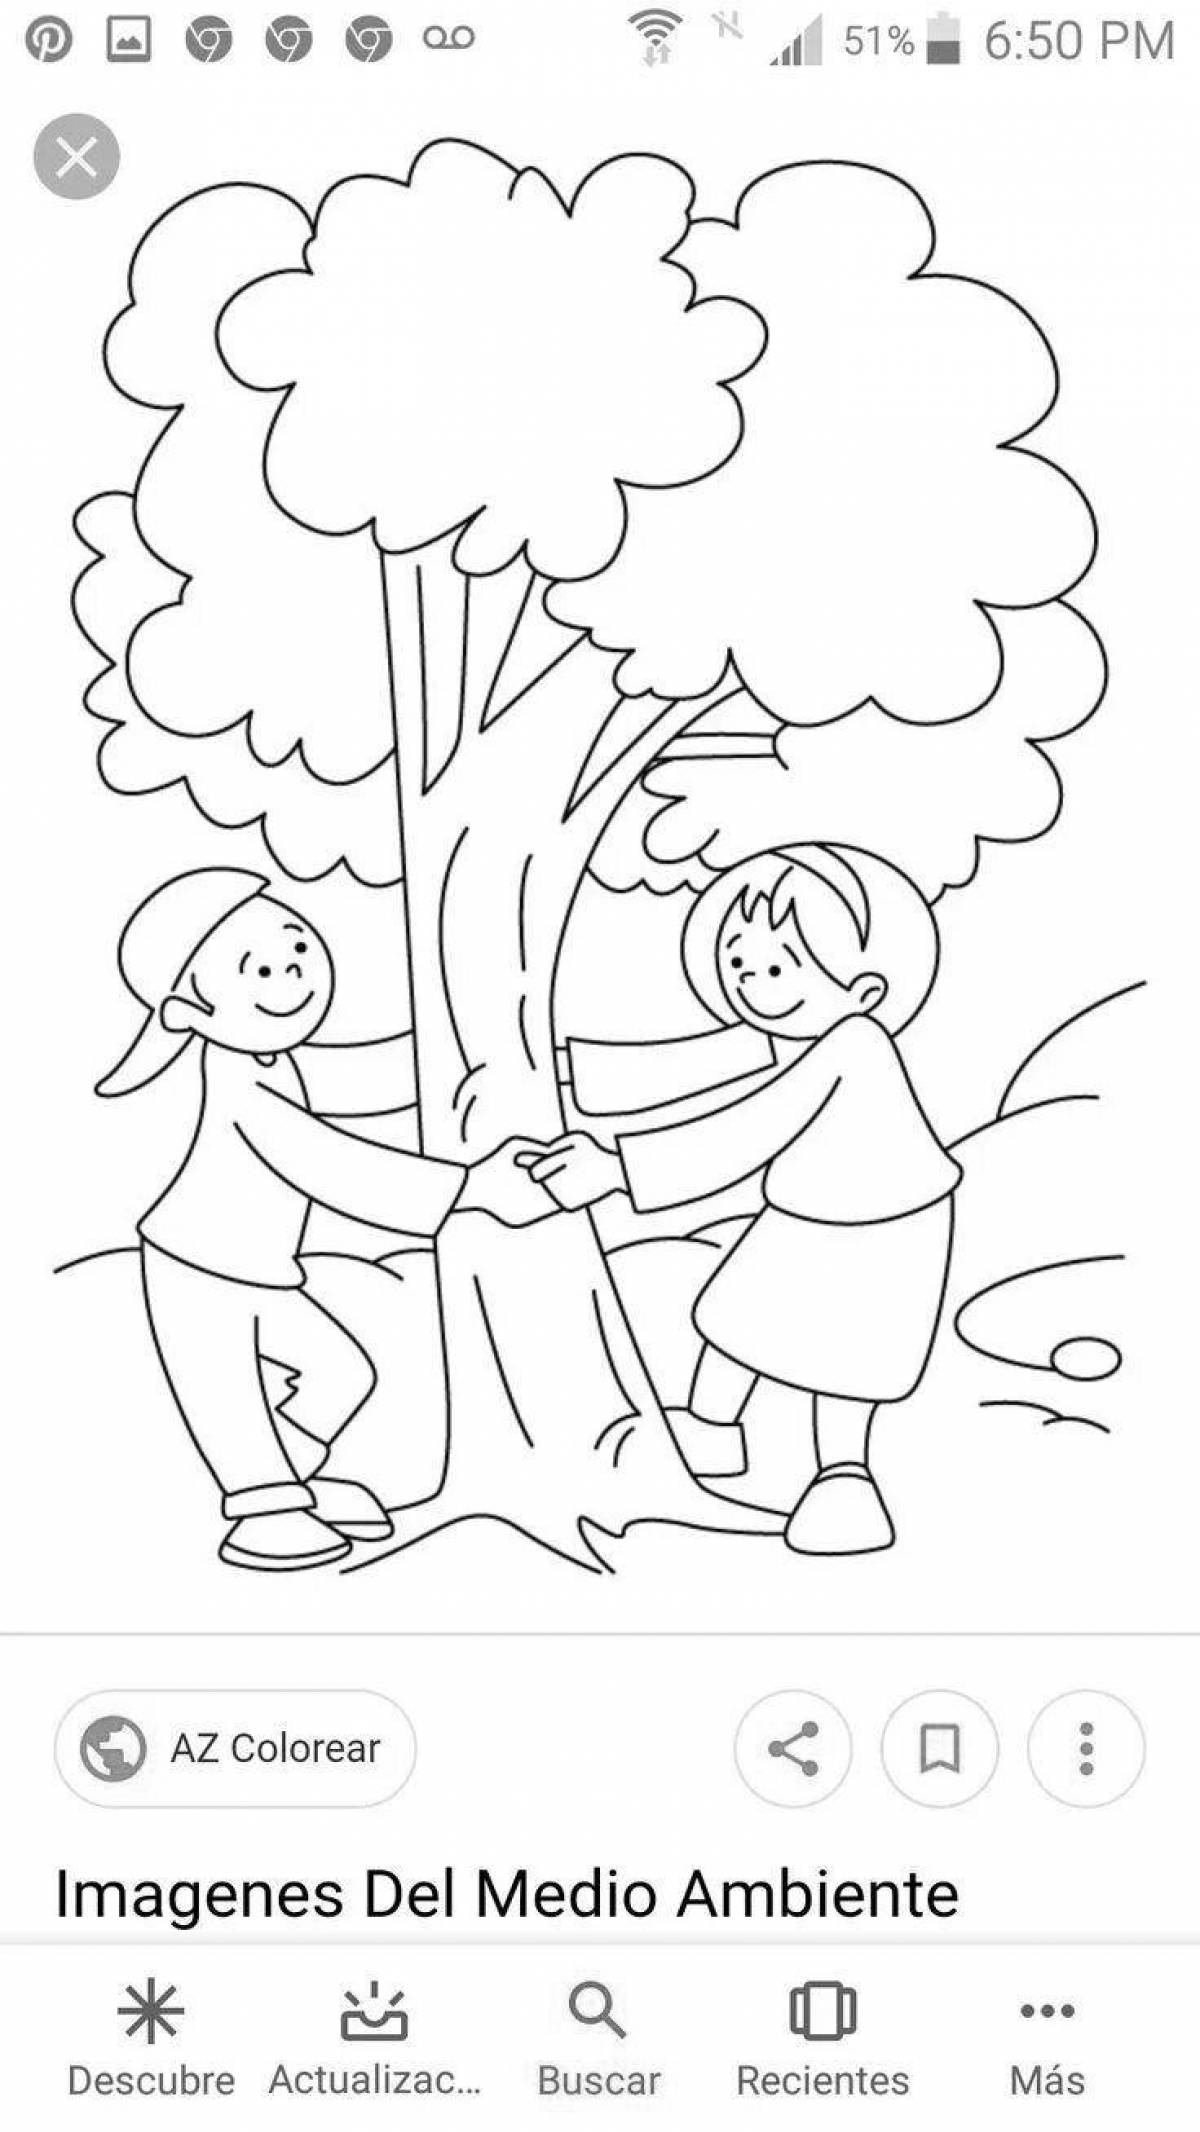 Bright eco coloring book for kids